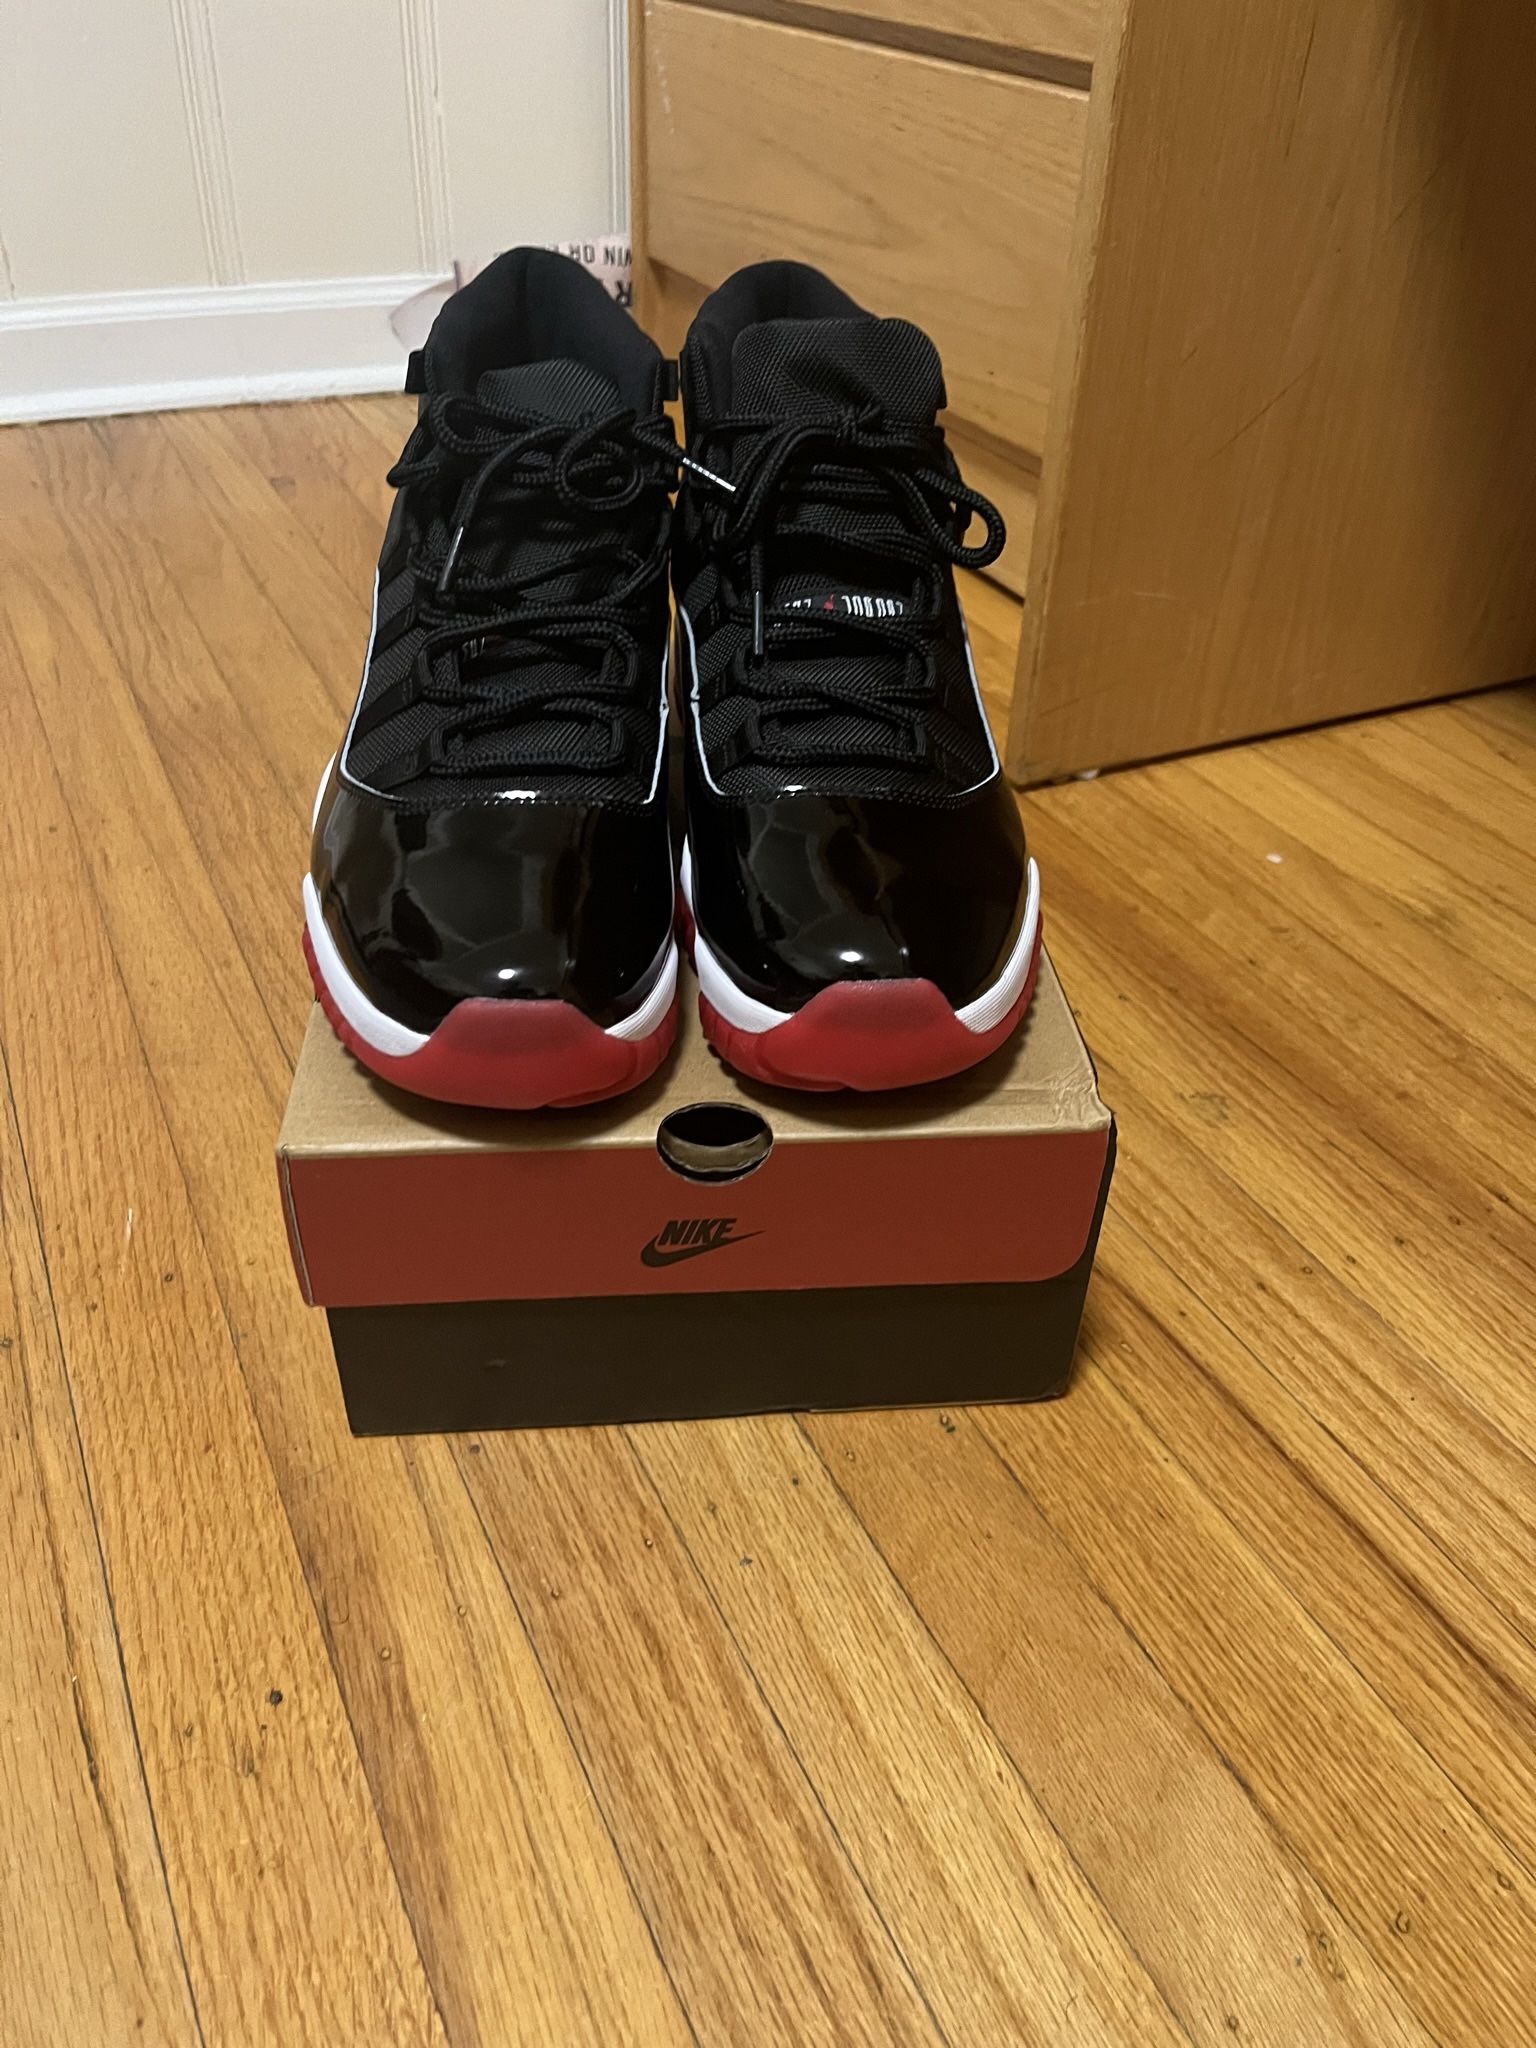 Bred 11 Size 13